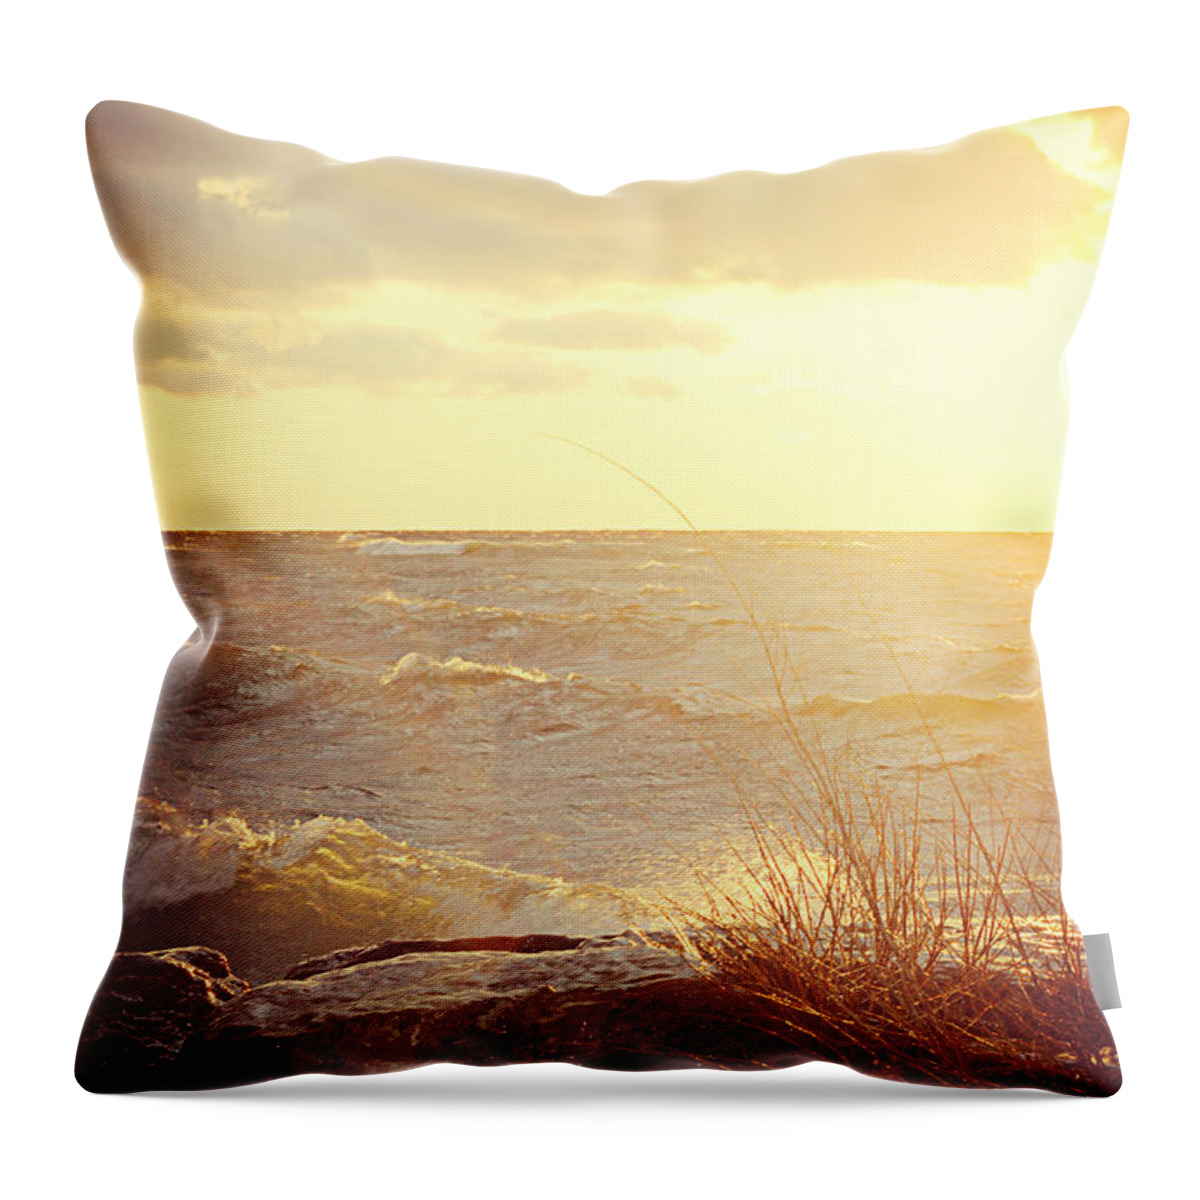 Scenics Throw Pillow featuring the photograph Winter At Lake Ontario by Anydirectflight